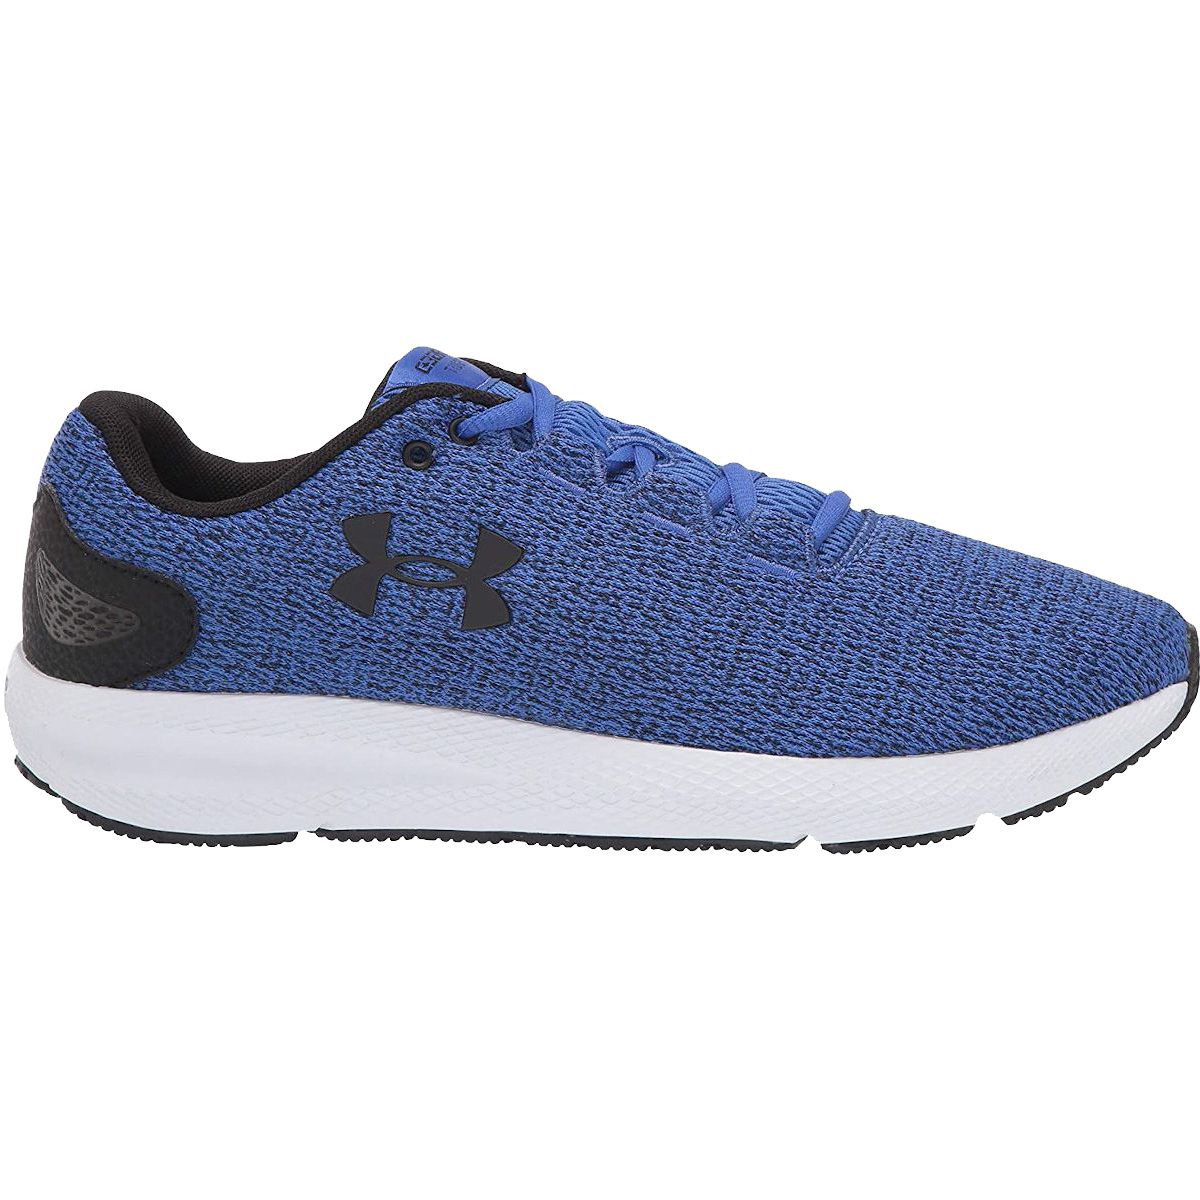 Under Armour Charged Pursuit 2 Twist Men's Running Shoes 302